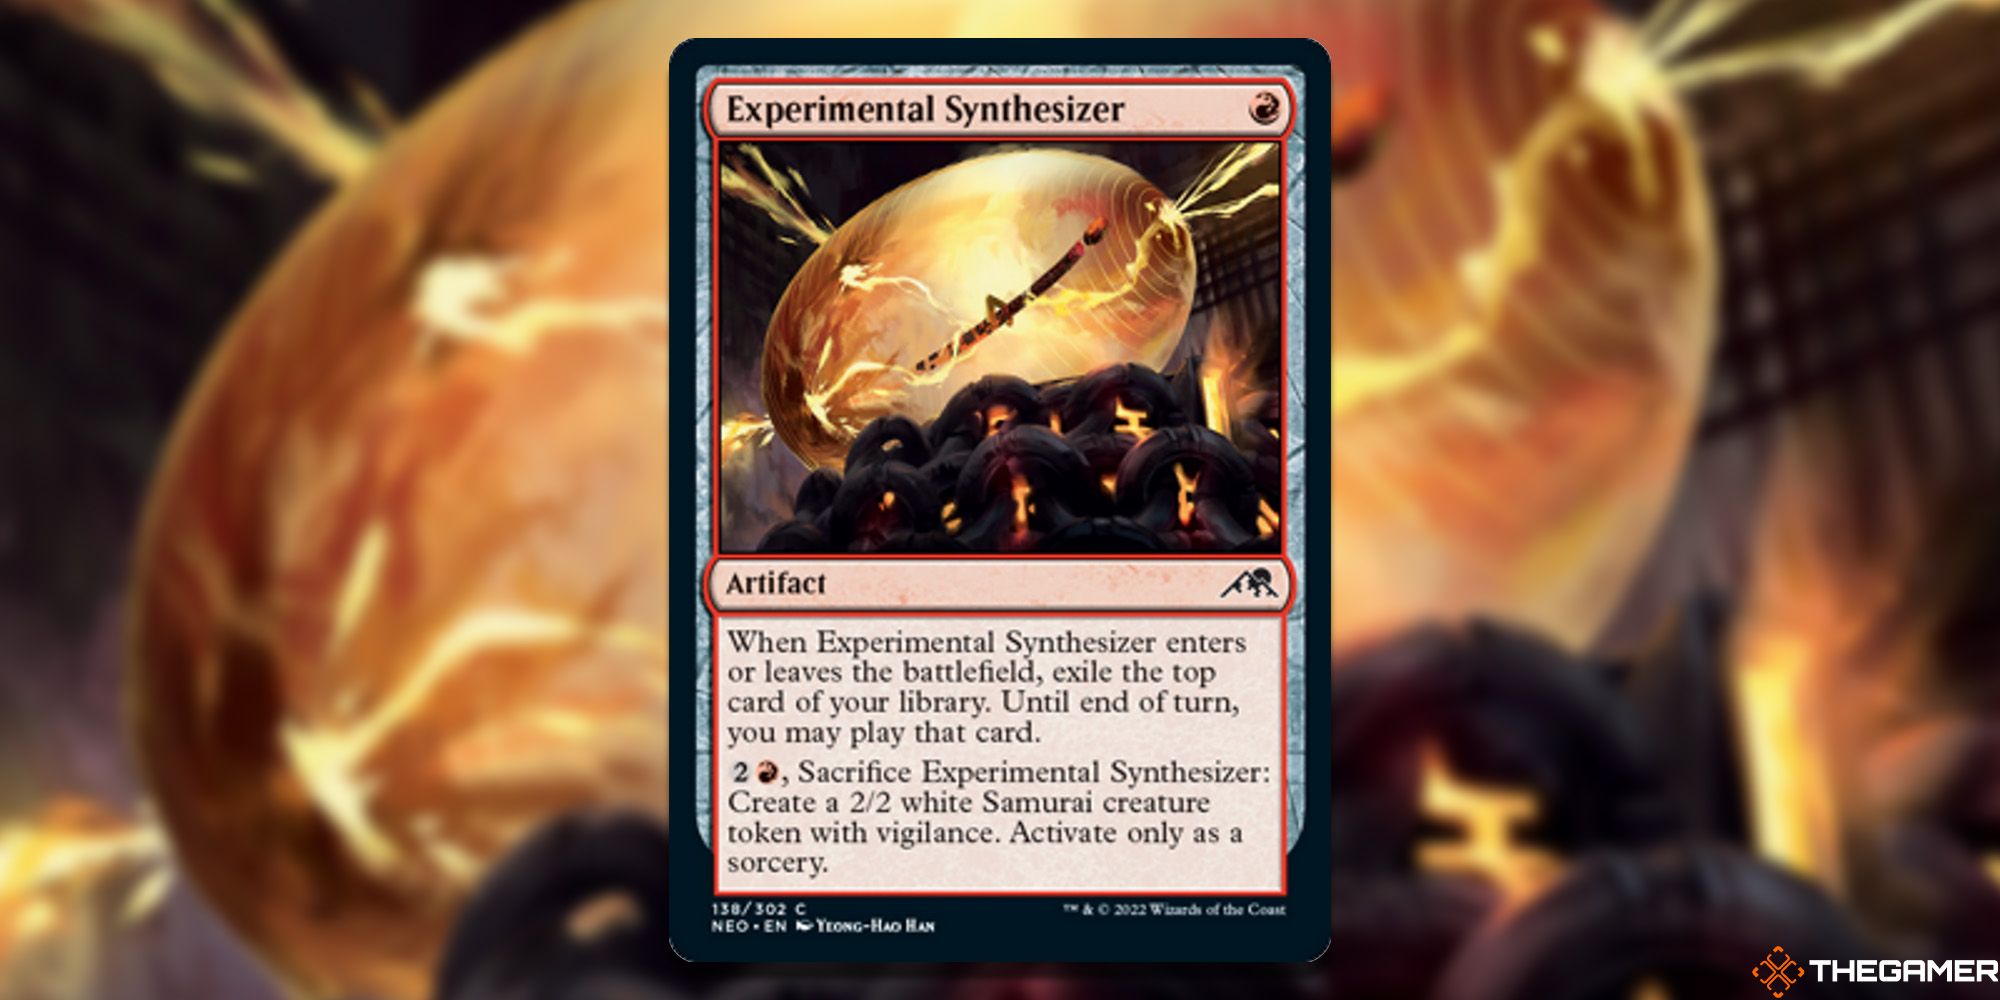 Experimental Synthesizer full card and art background